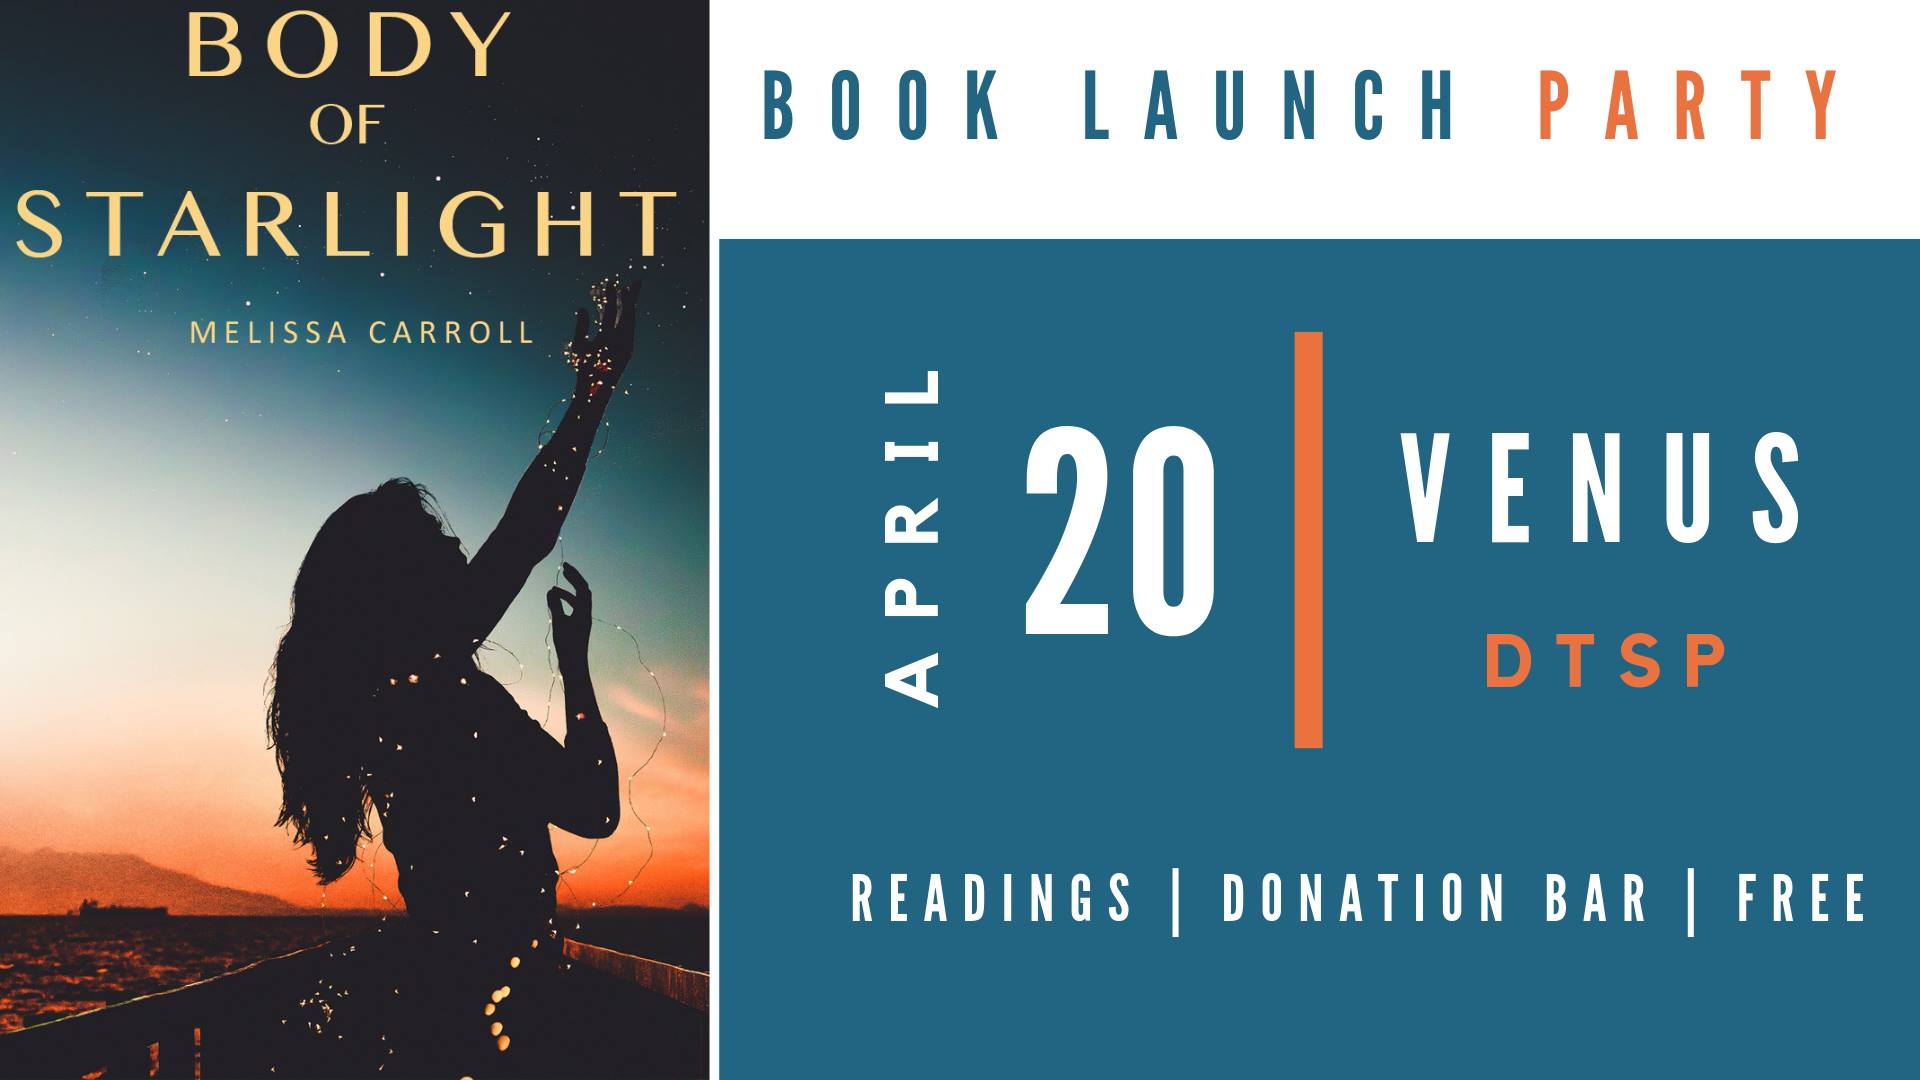 Image shows flyer for Body of Starlight book launch party